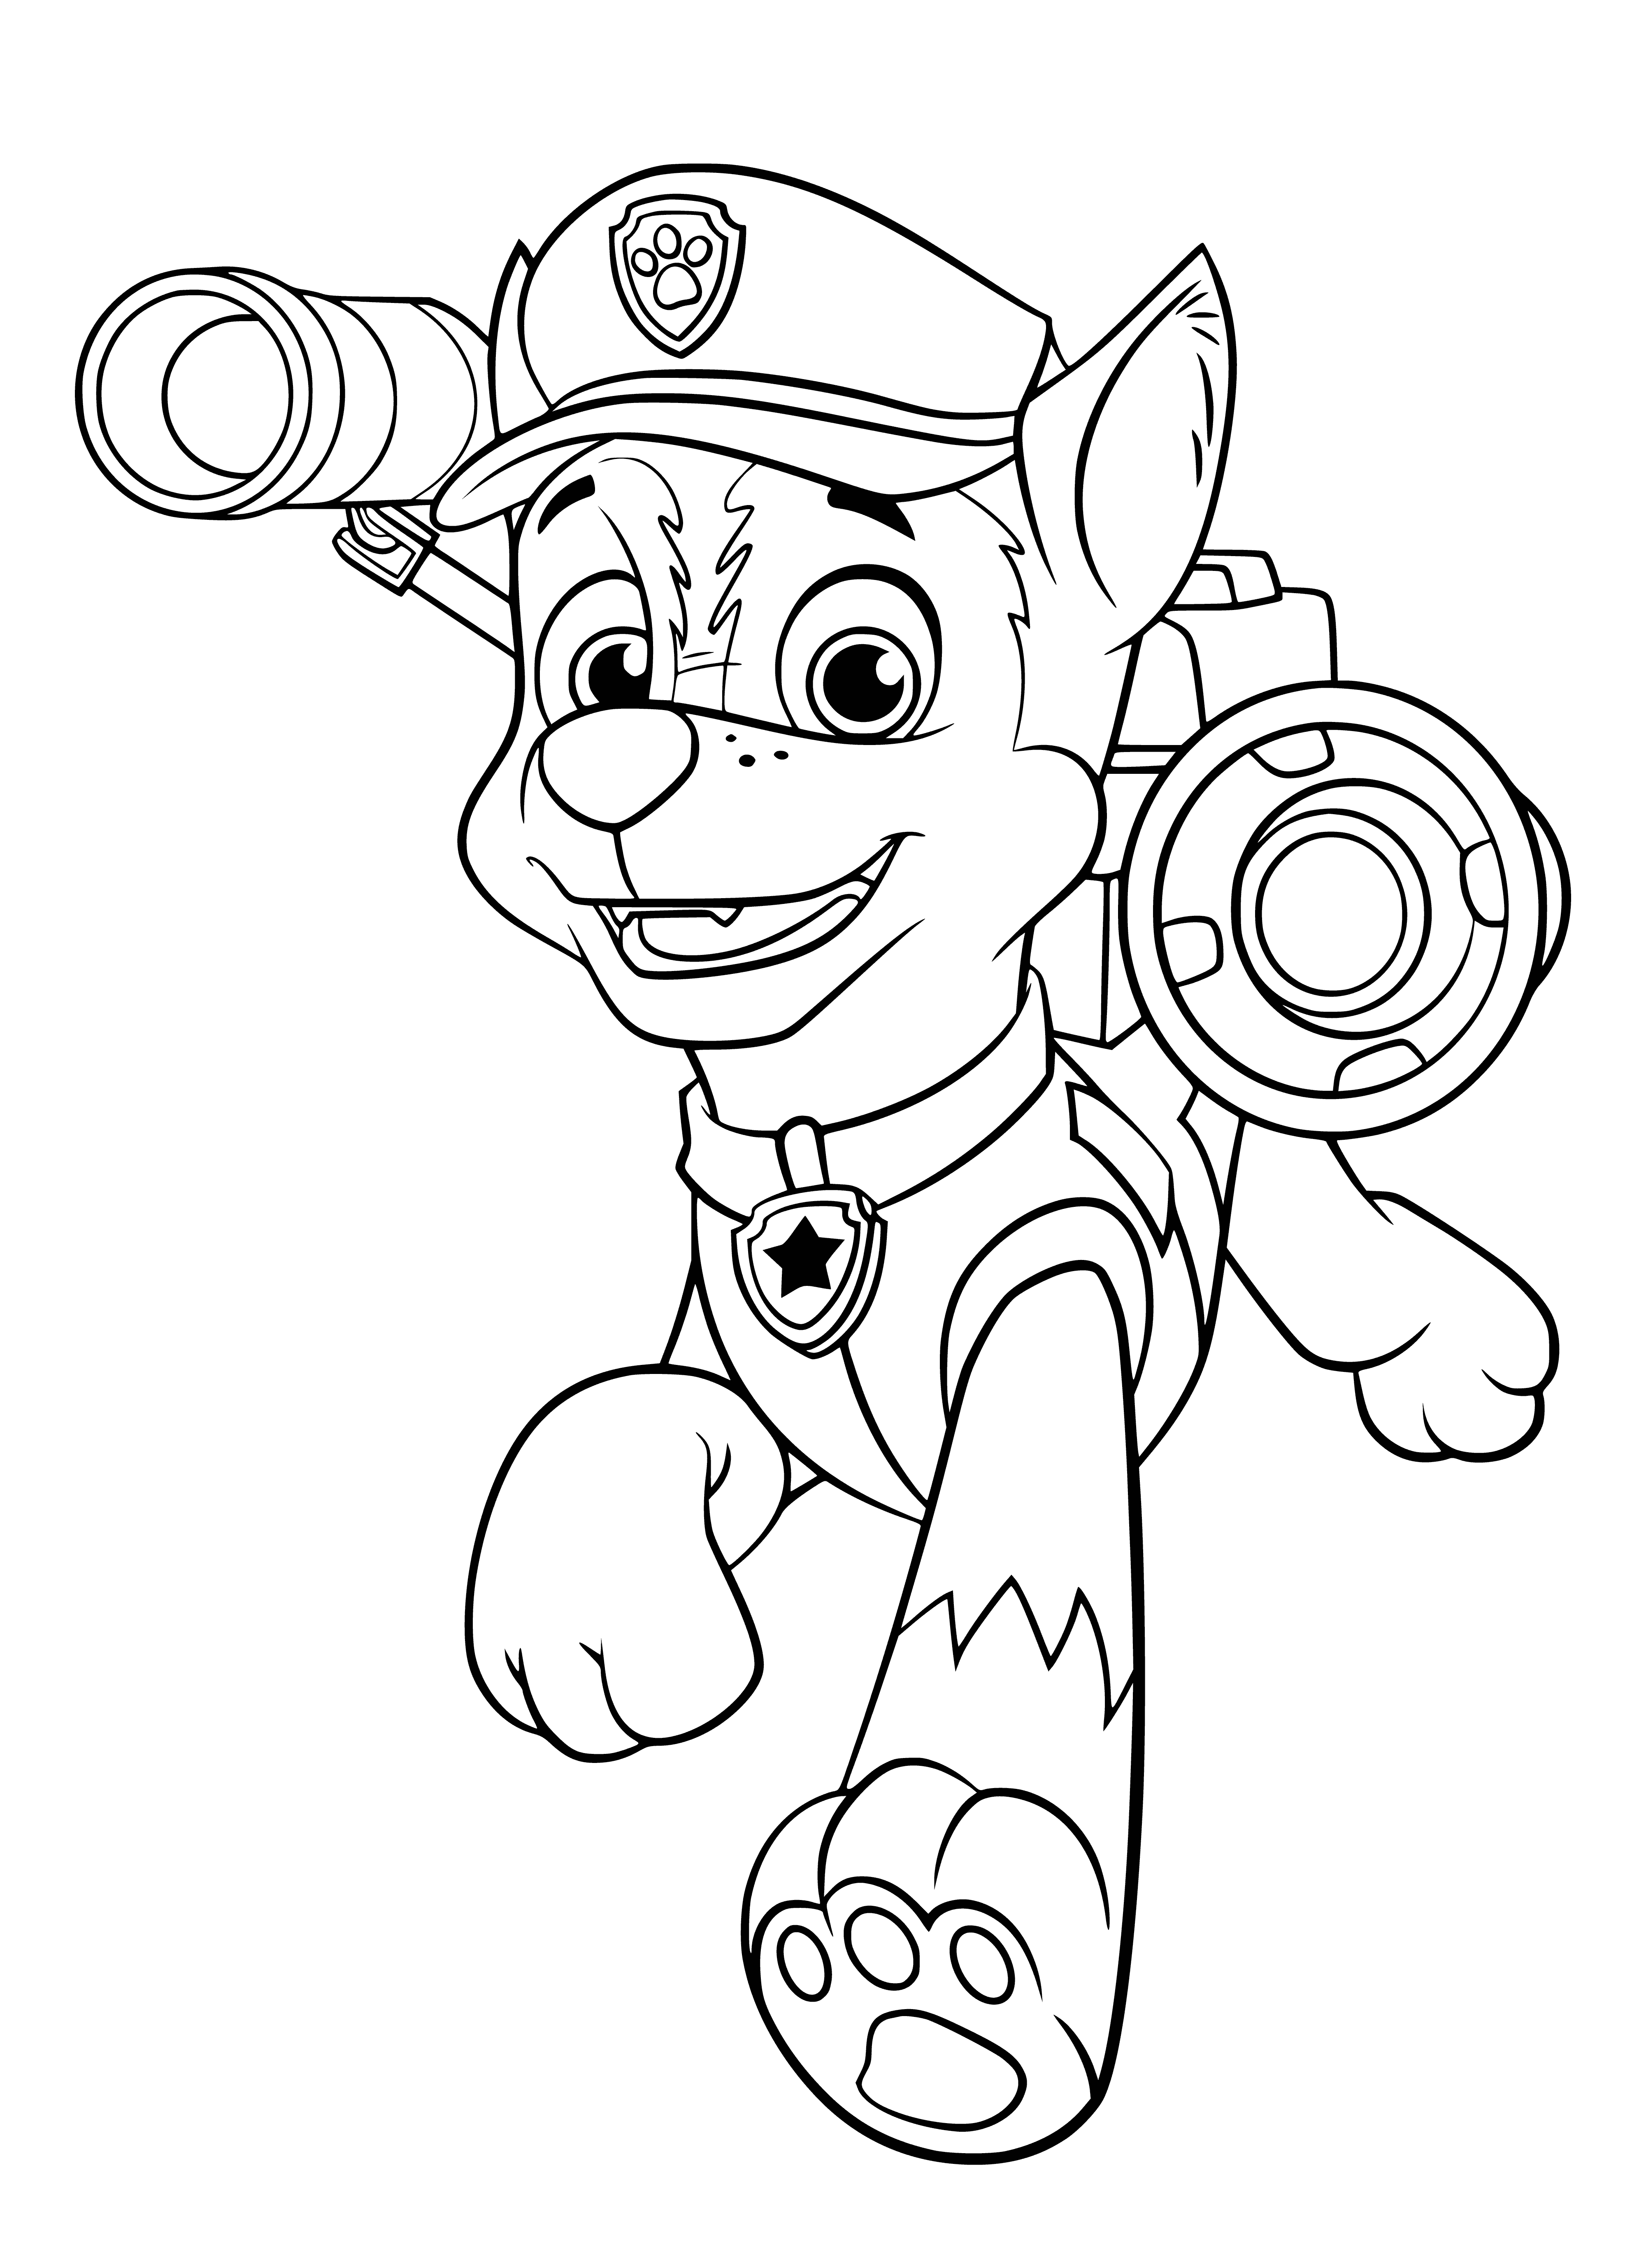 coloring page: PAW Patrol car-inspired racer toy car with red/white paint, blue details, plastic canopy, 4 wheels & checkered flag.